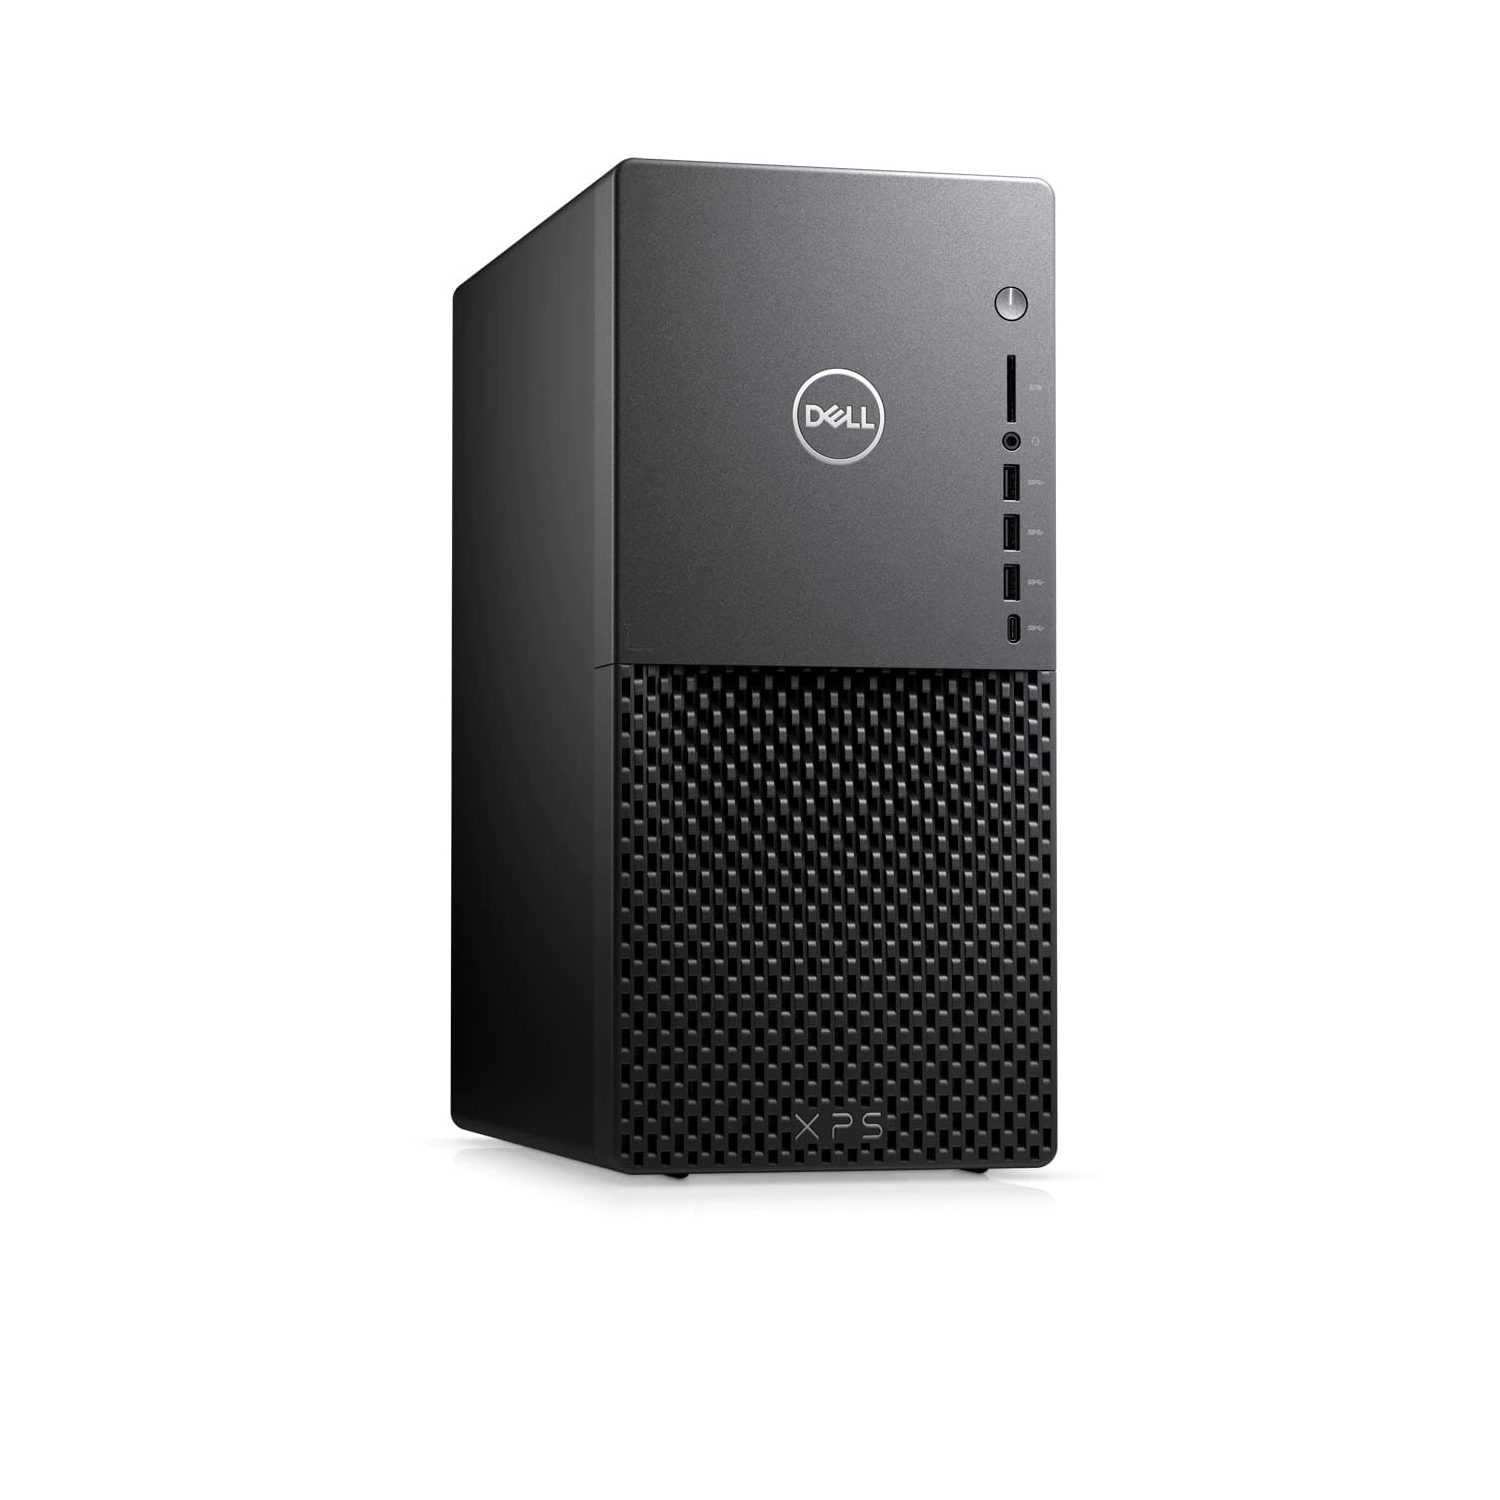 Refurbished (Excellent) - Dell XPS 8940 Desktop (2020) | Core i7 - 1TB SSD + 1TB HDD - 32GB RAM - 2060 SUPER | 8 Cores @ 5.1 GHz - 10th Gen CPU Certified Refurbished